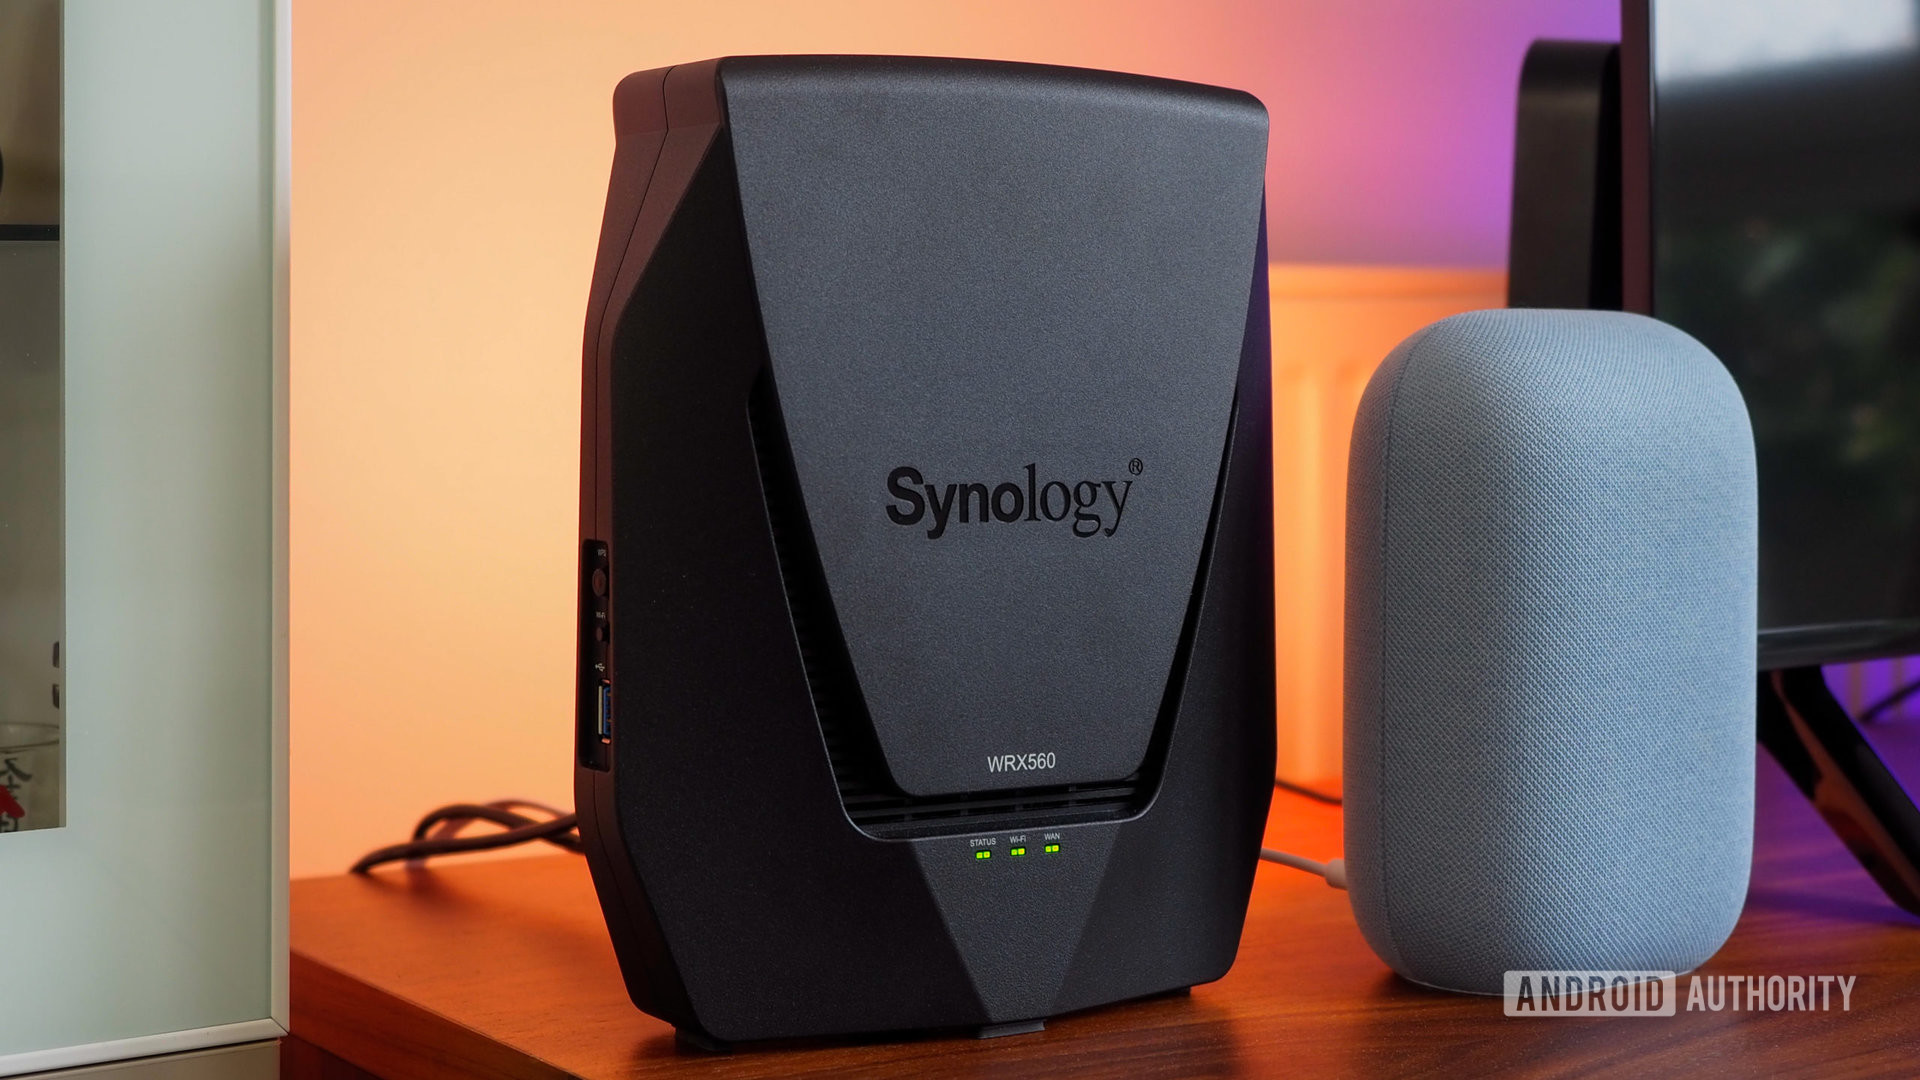 Synology WRX560 router next to a Google Nest Audio with orange and purple light in the background